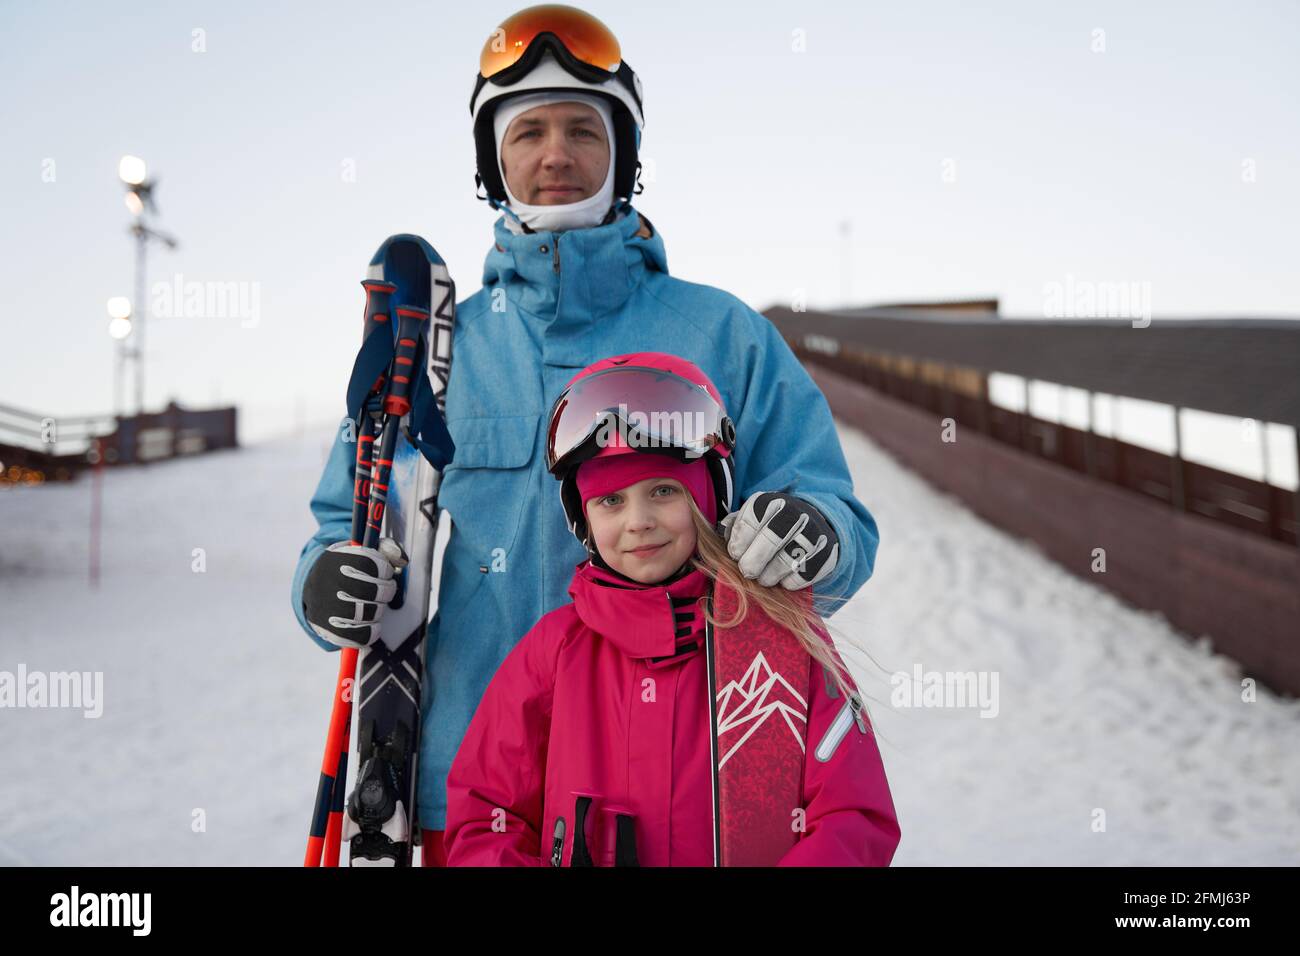 Glad father and daughter wearing warm sports clothes and helmets standing with skis on snowy hill slope and looking at camera contentedly Stock Photo